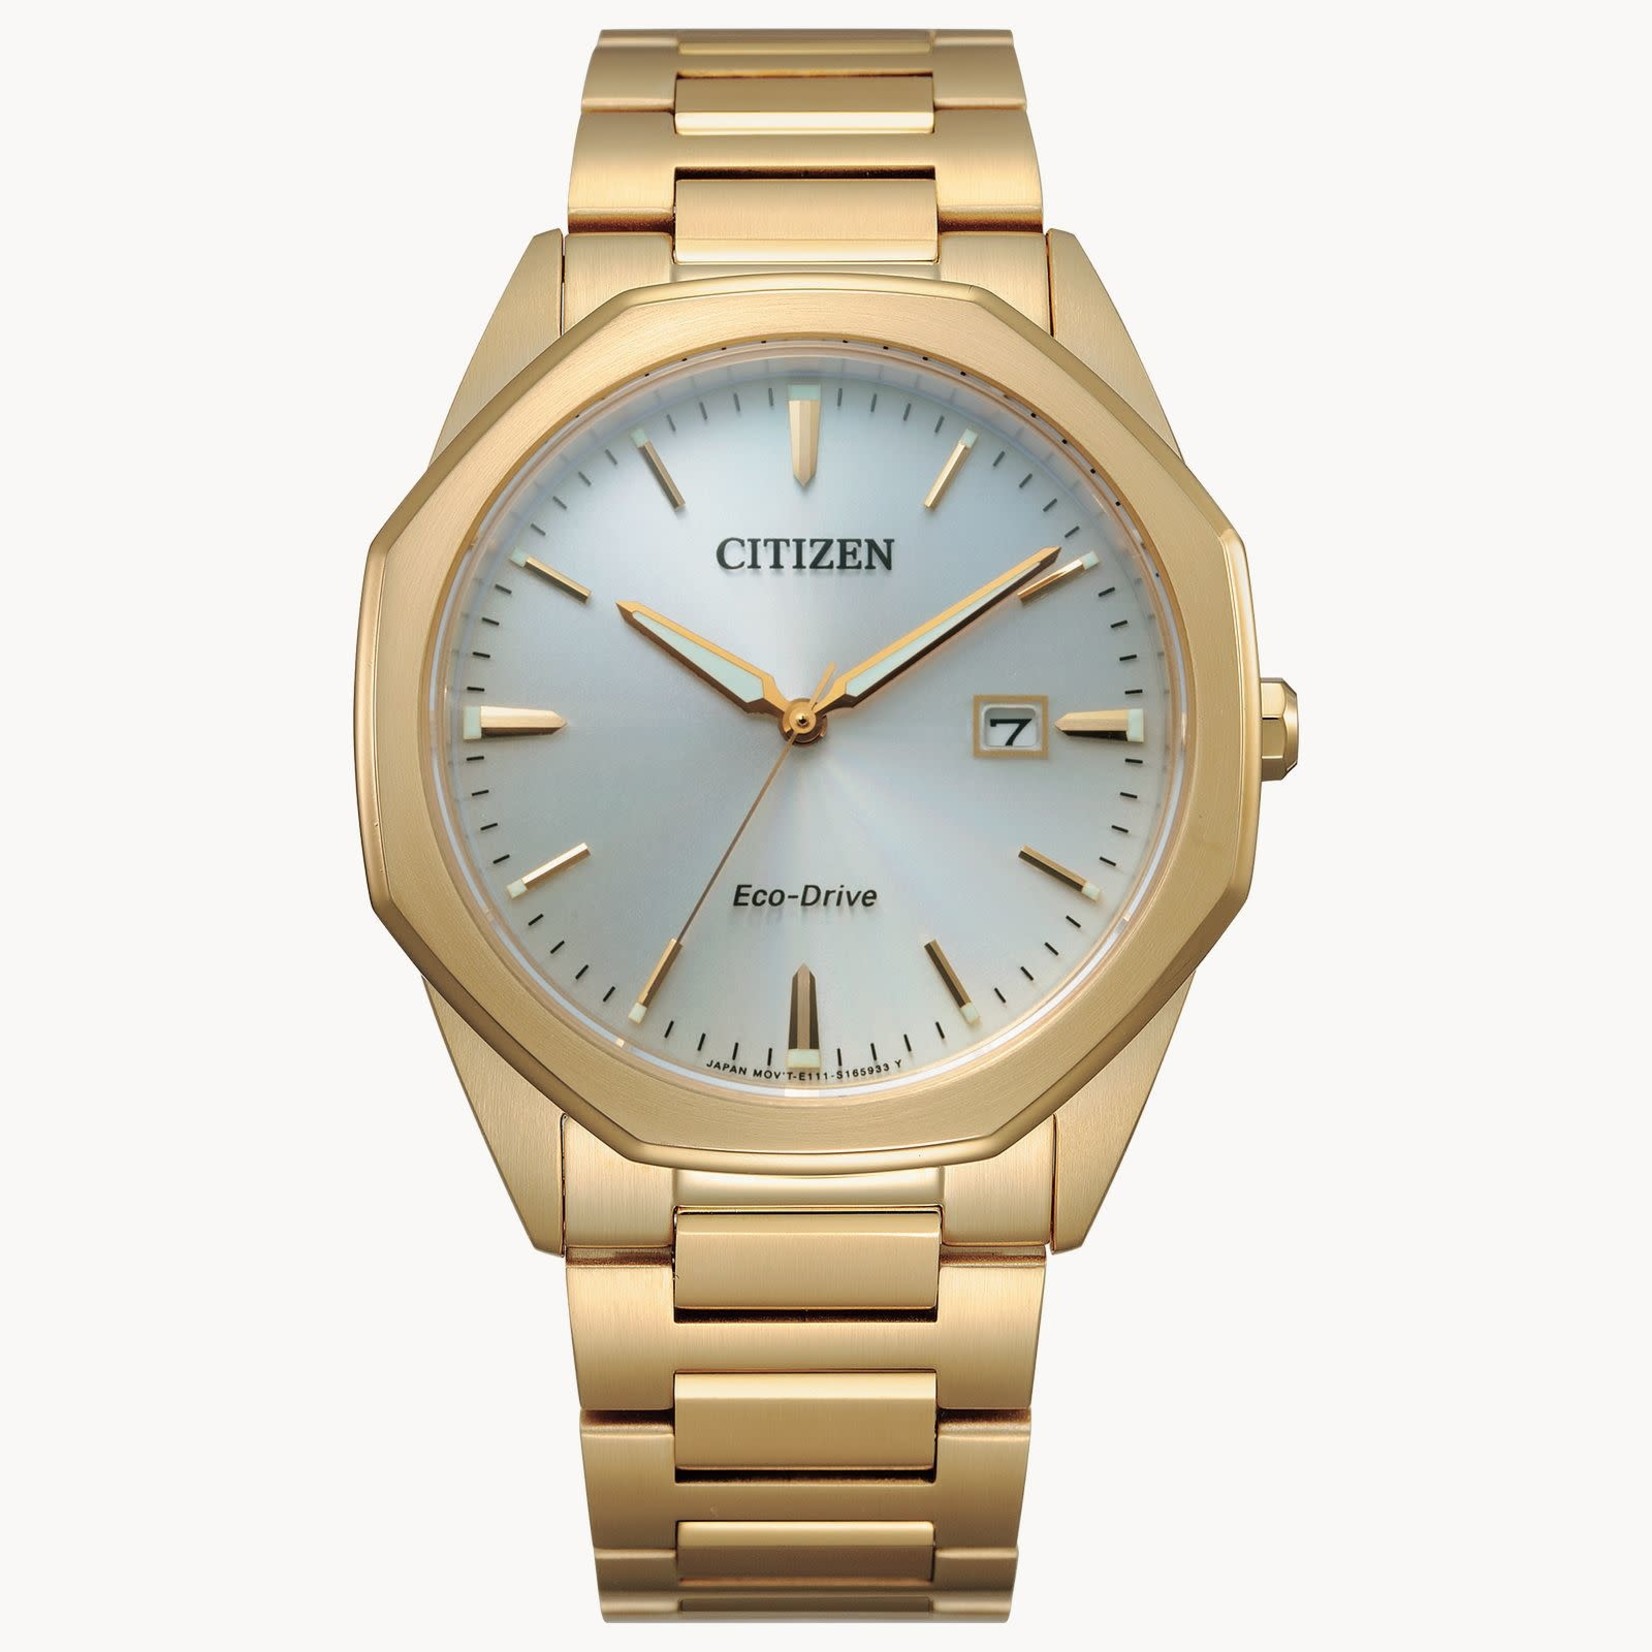 CITIZEN WATCH COMPANY Citizen Eco Drive Corso Gold Tone Stainless Steel Watch